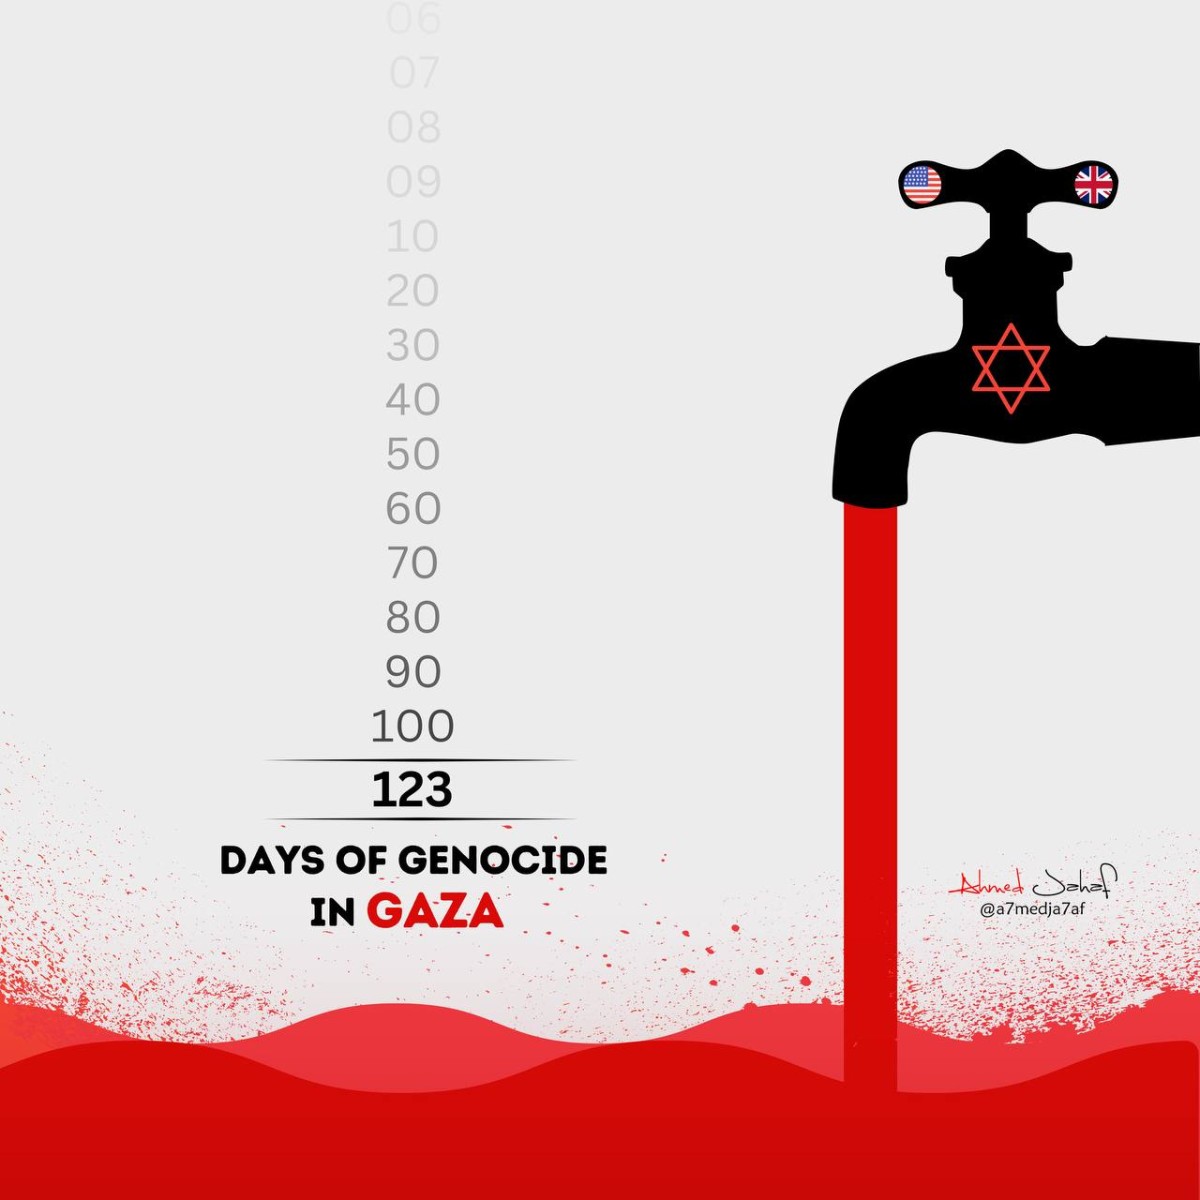 123 days of genocide in Gaza, by the Zionist entity “Israel” with US and UK support